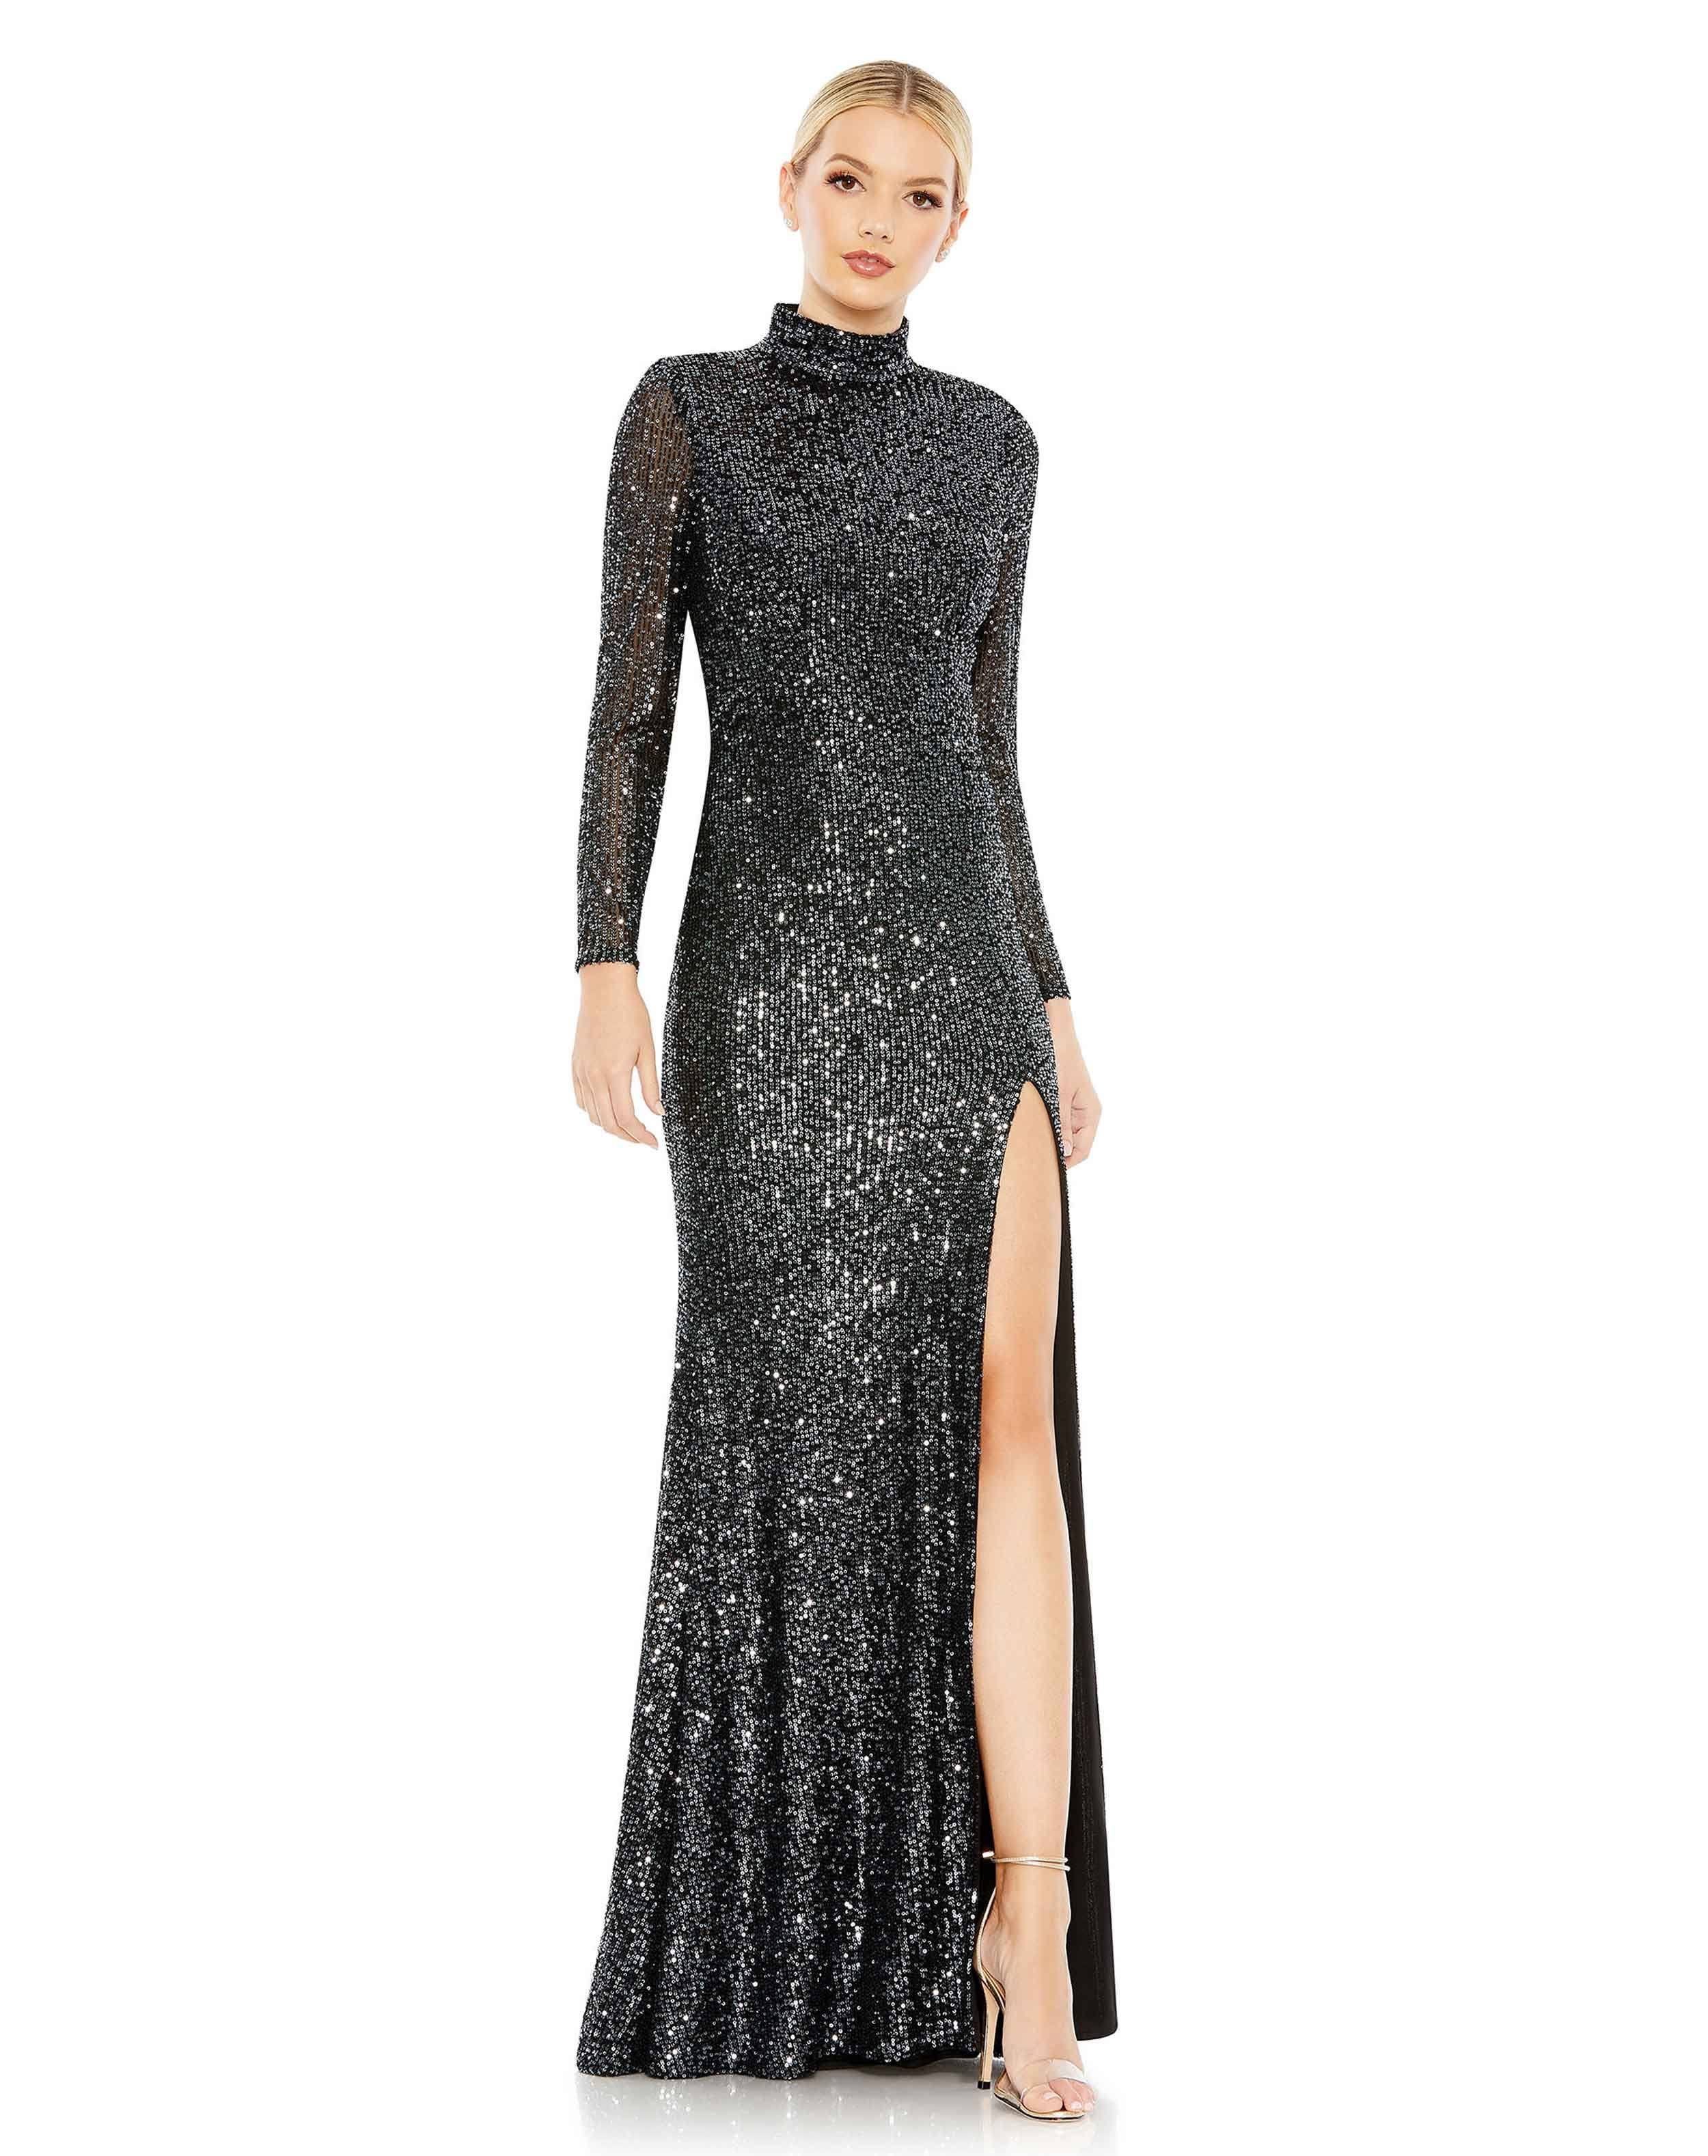 Graphite High Neck Long Sleeve Lace Gown by Ieena for Mac Duggal | Image